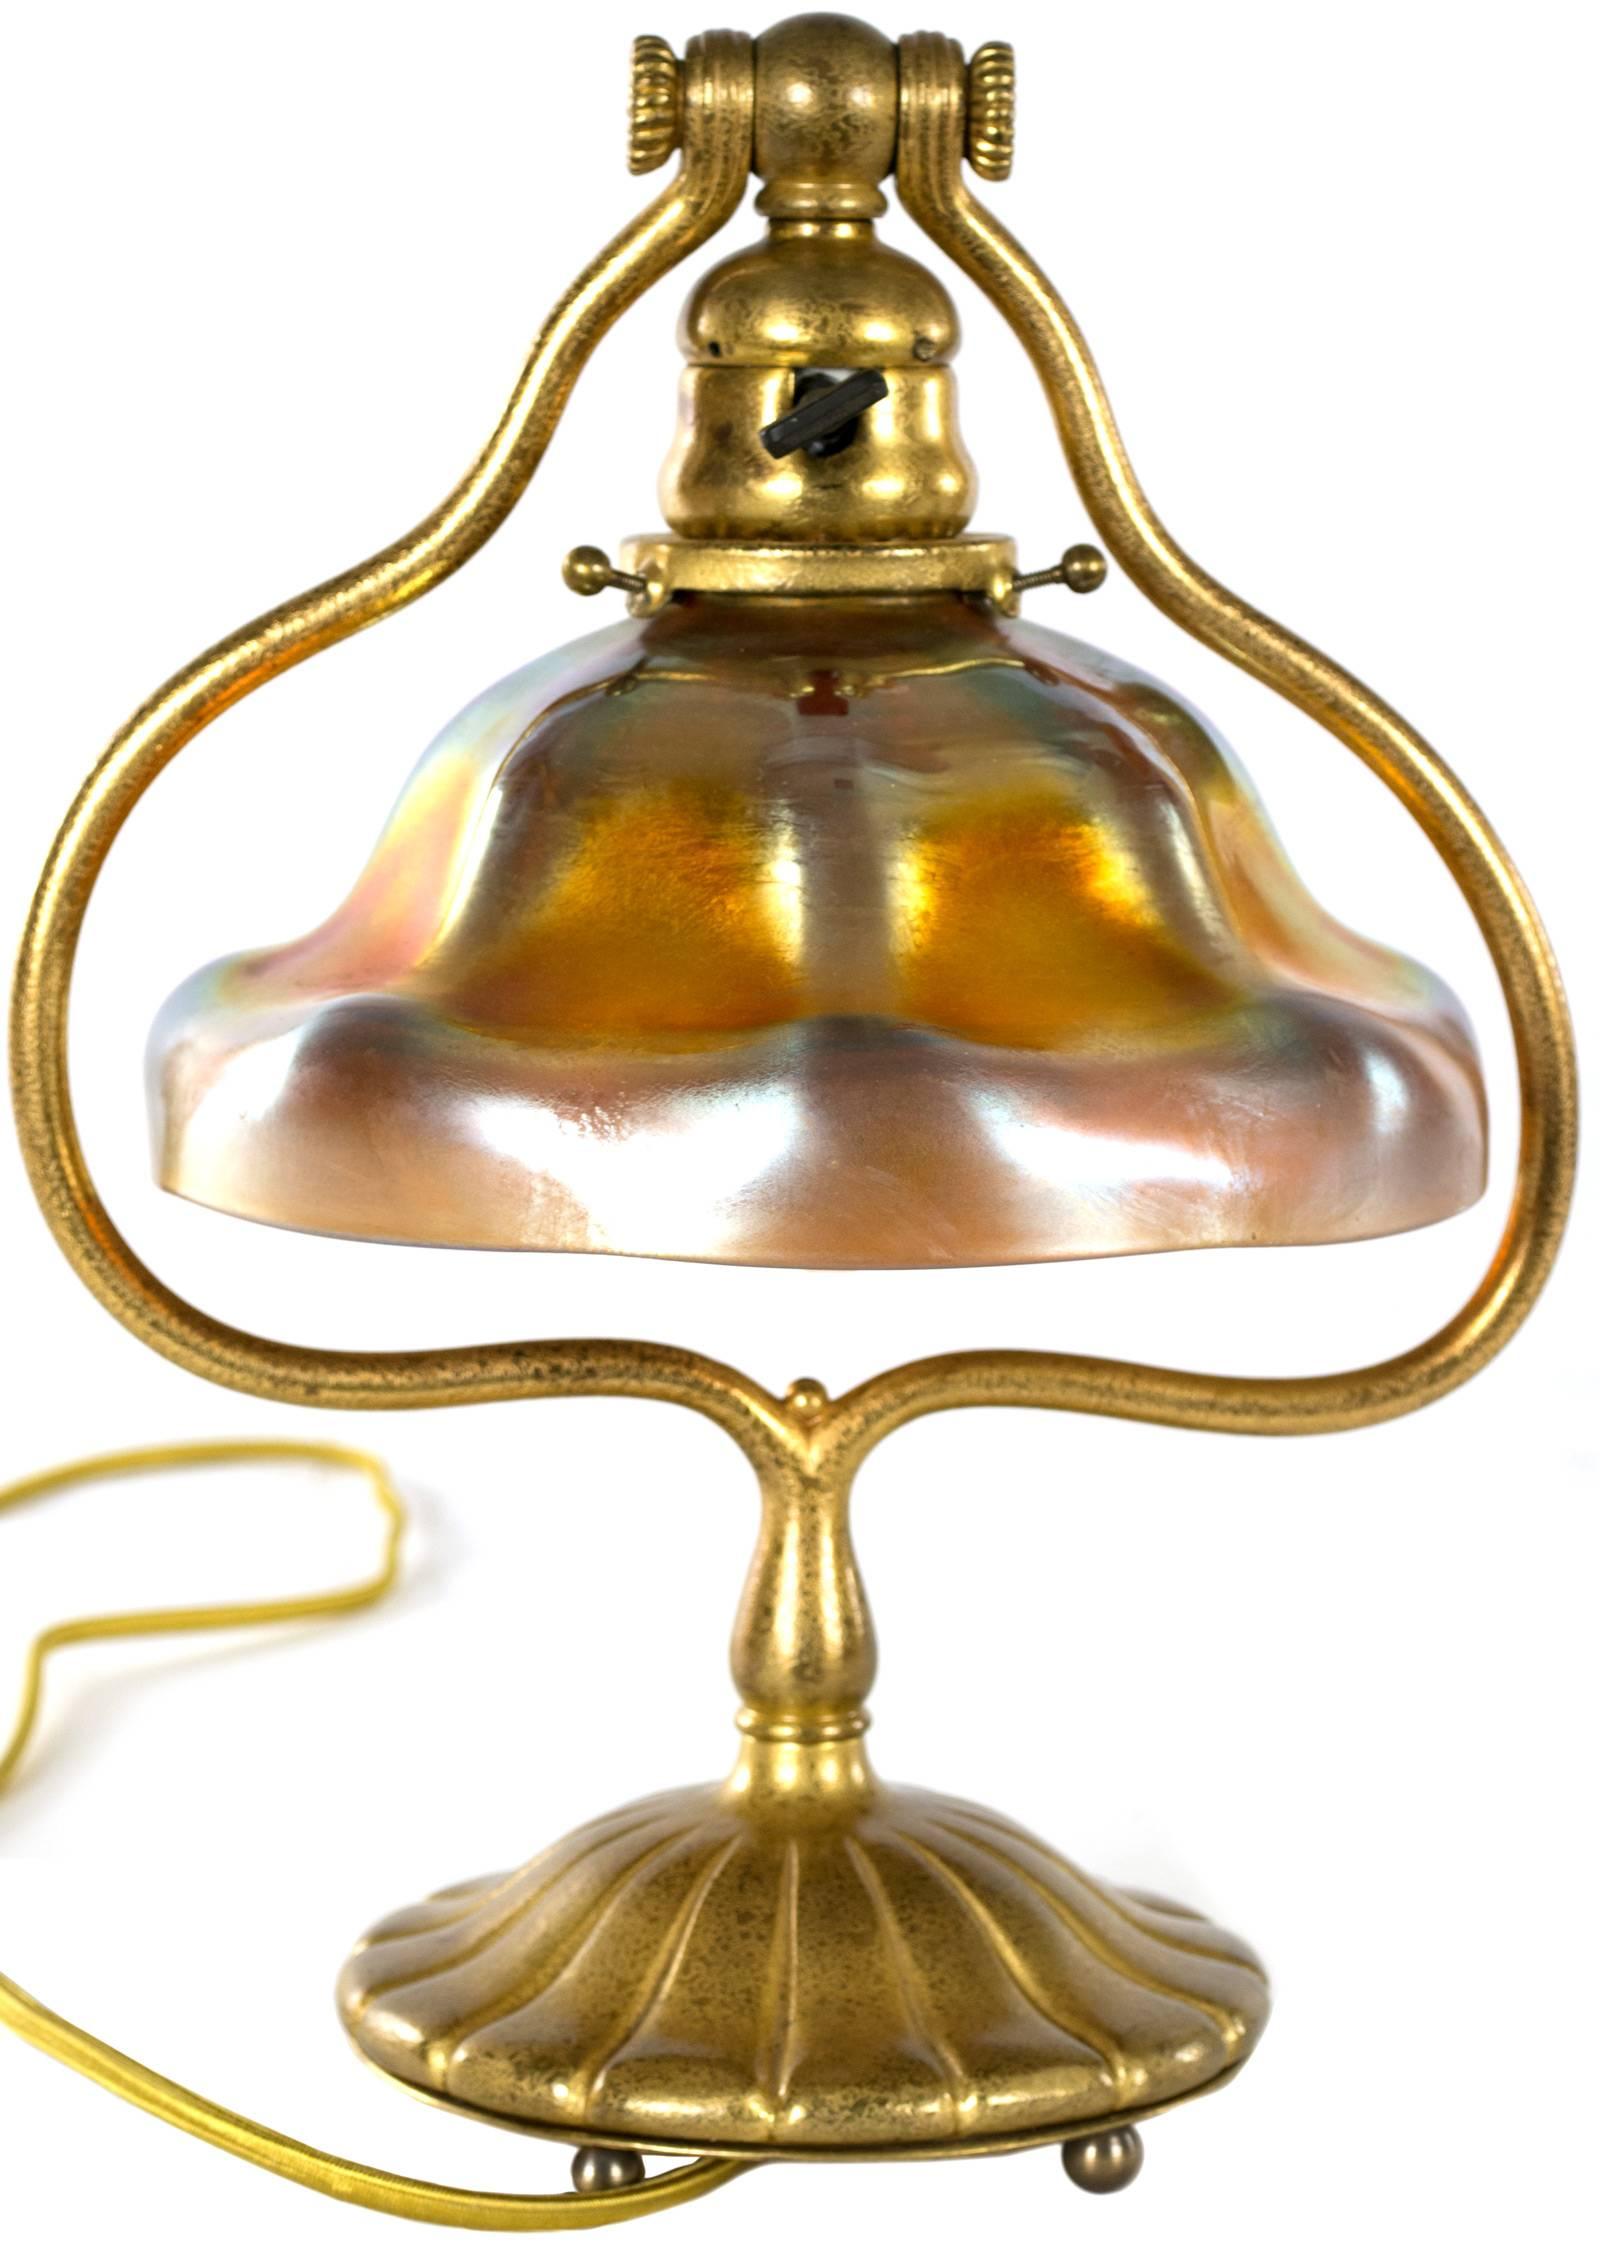 Exhibiting the quality and beauty of Tiffany's best work, the gilt bronze lamp body, in the shape of a harp holds an iridescent favrile glass lampshade. The base is stamped 